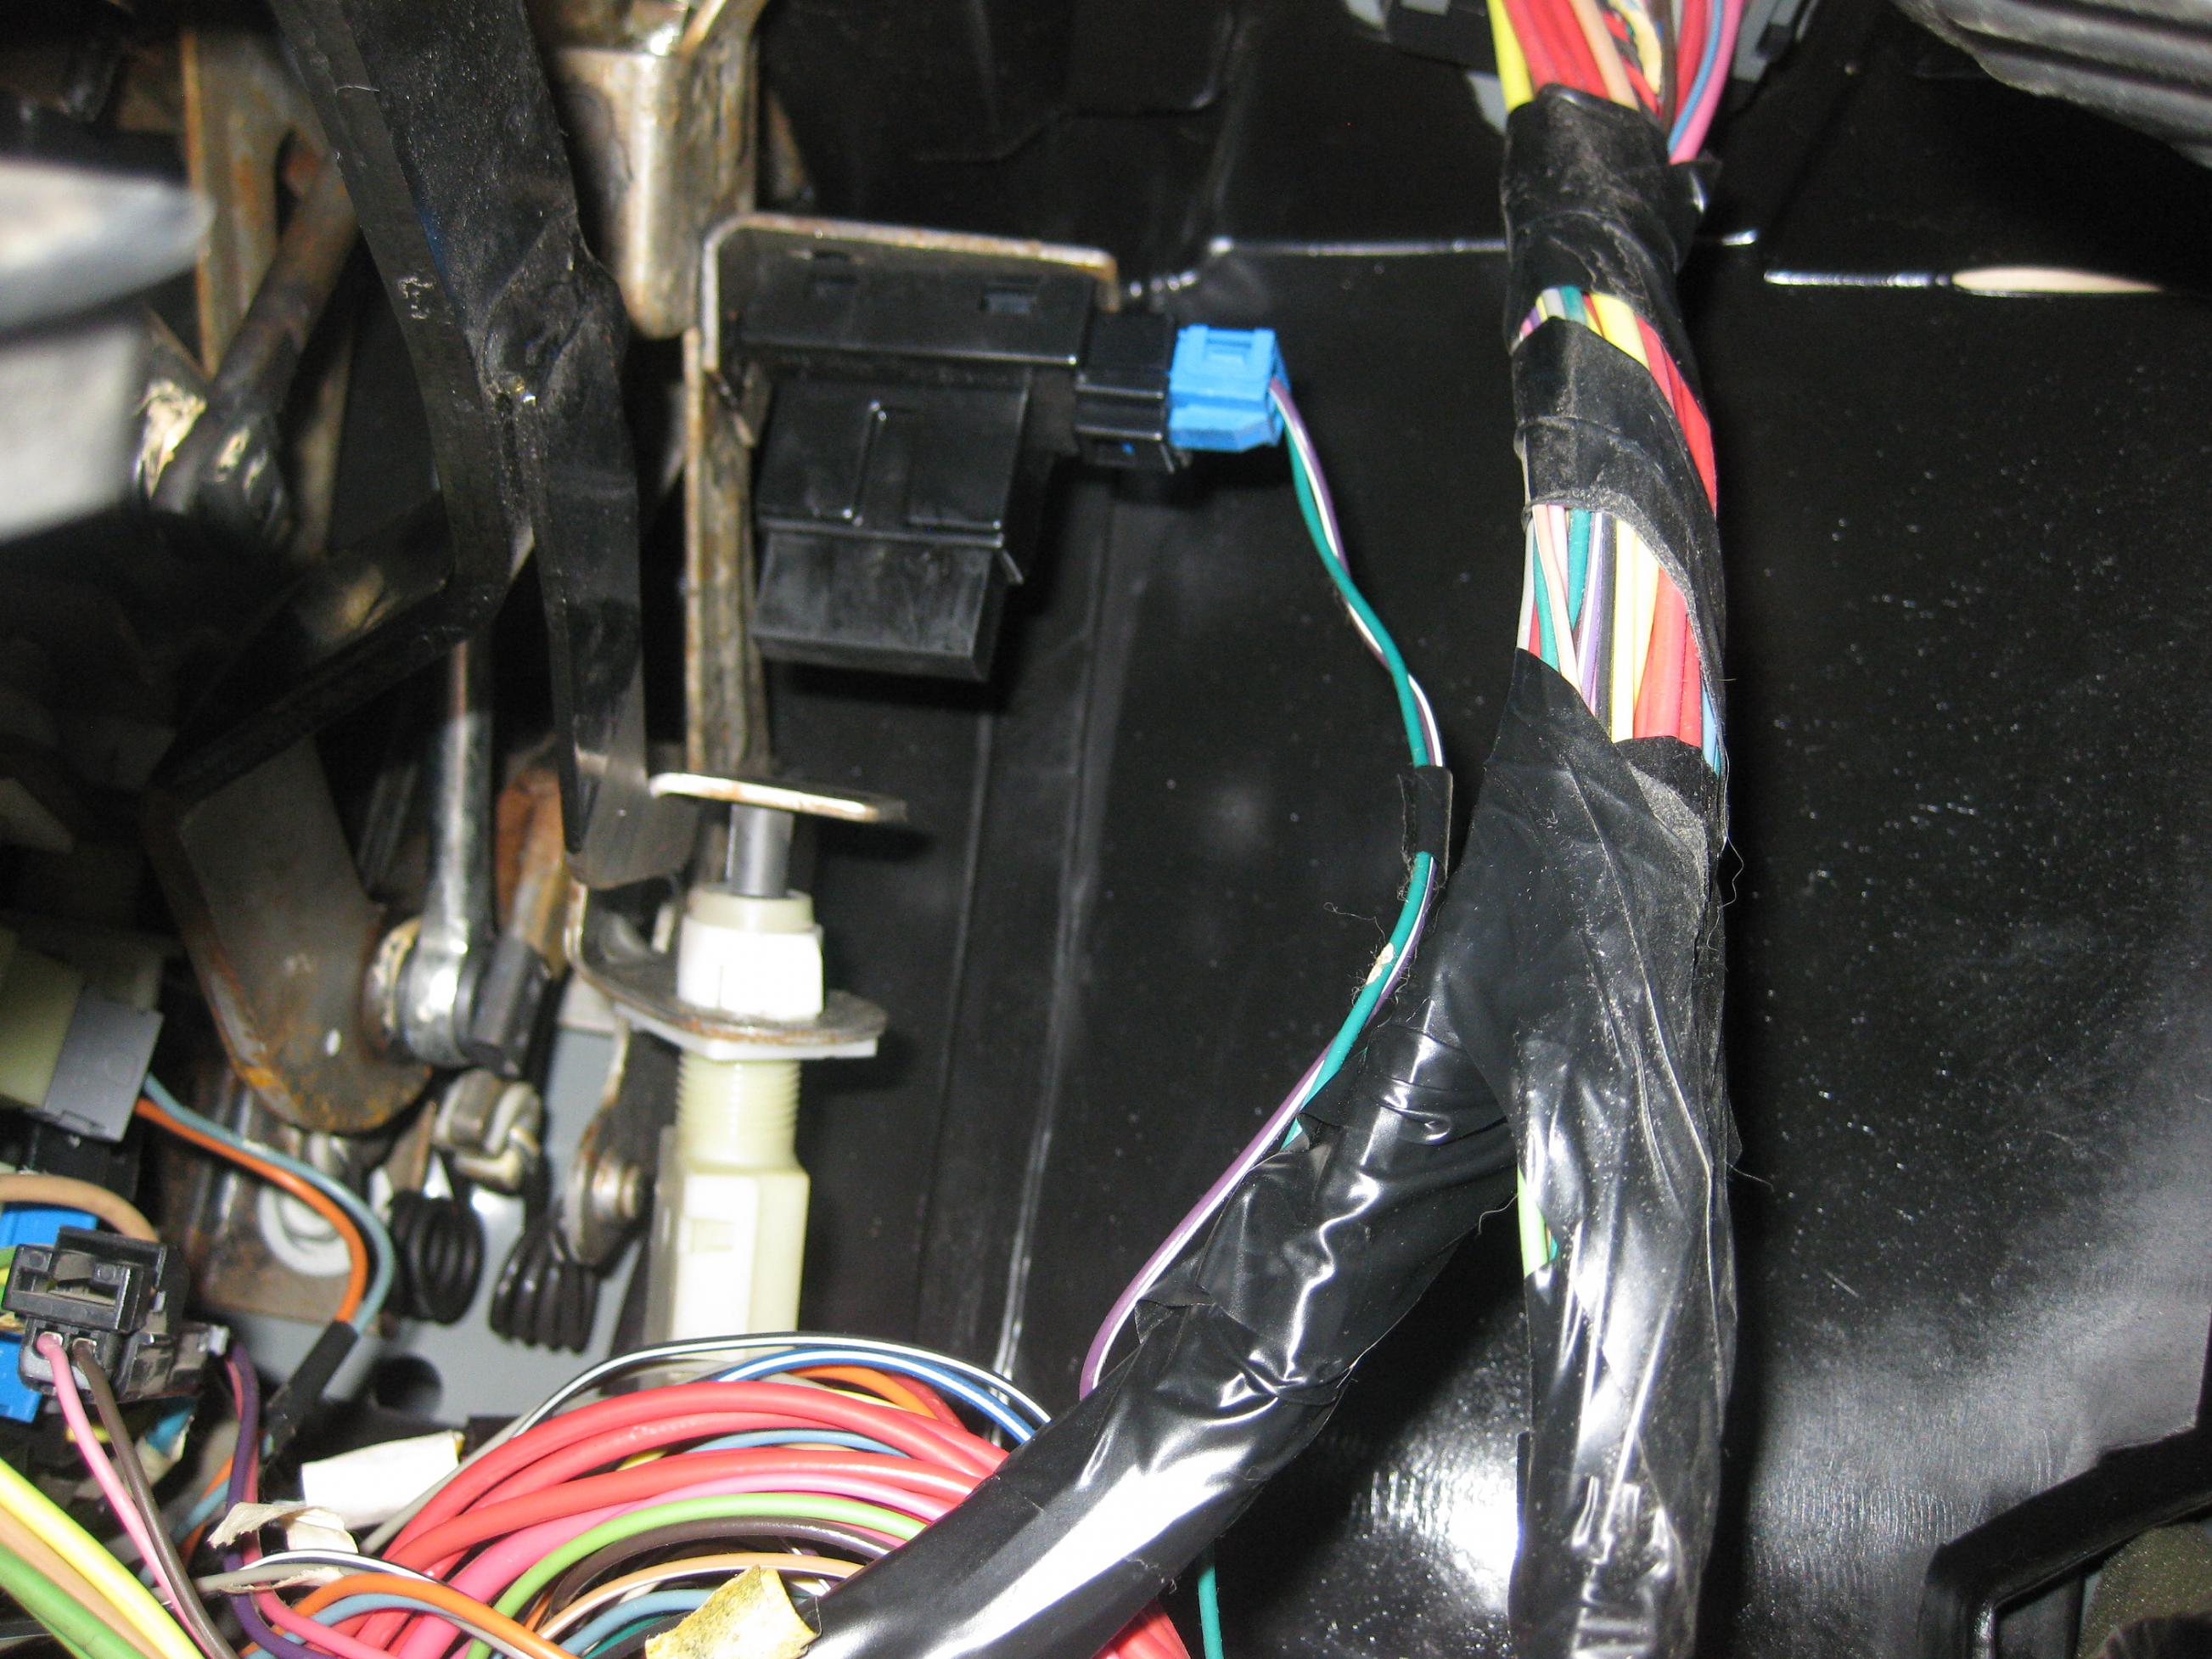 P0704 Clutch Switch Input Circuit Malfunction - Page 2 - LS1TECH - Camaro  and Firebird Forum Discussion